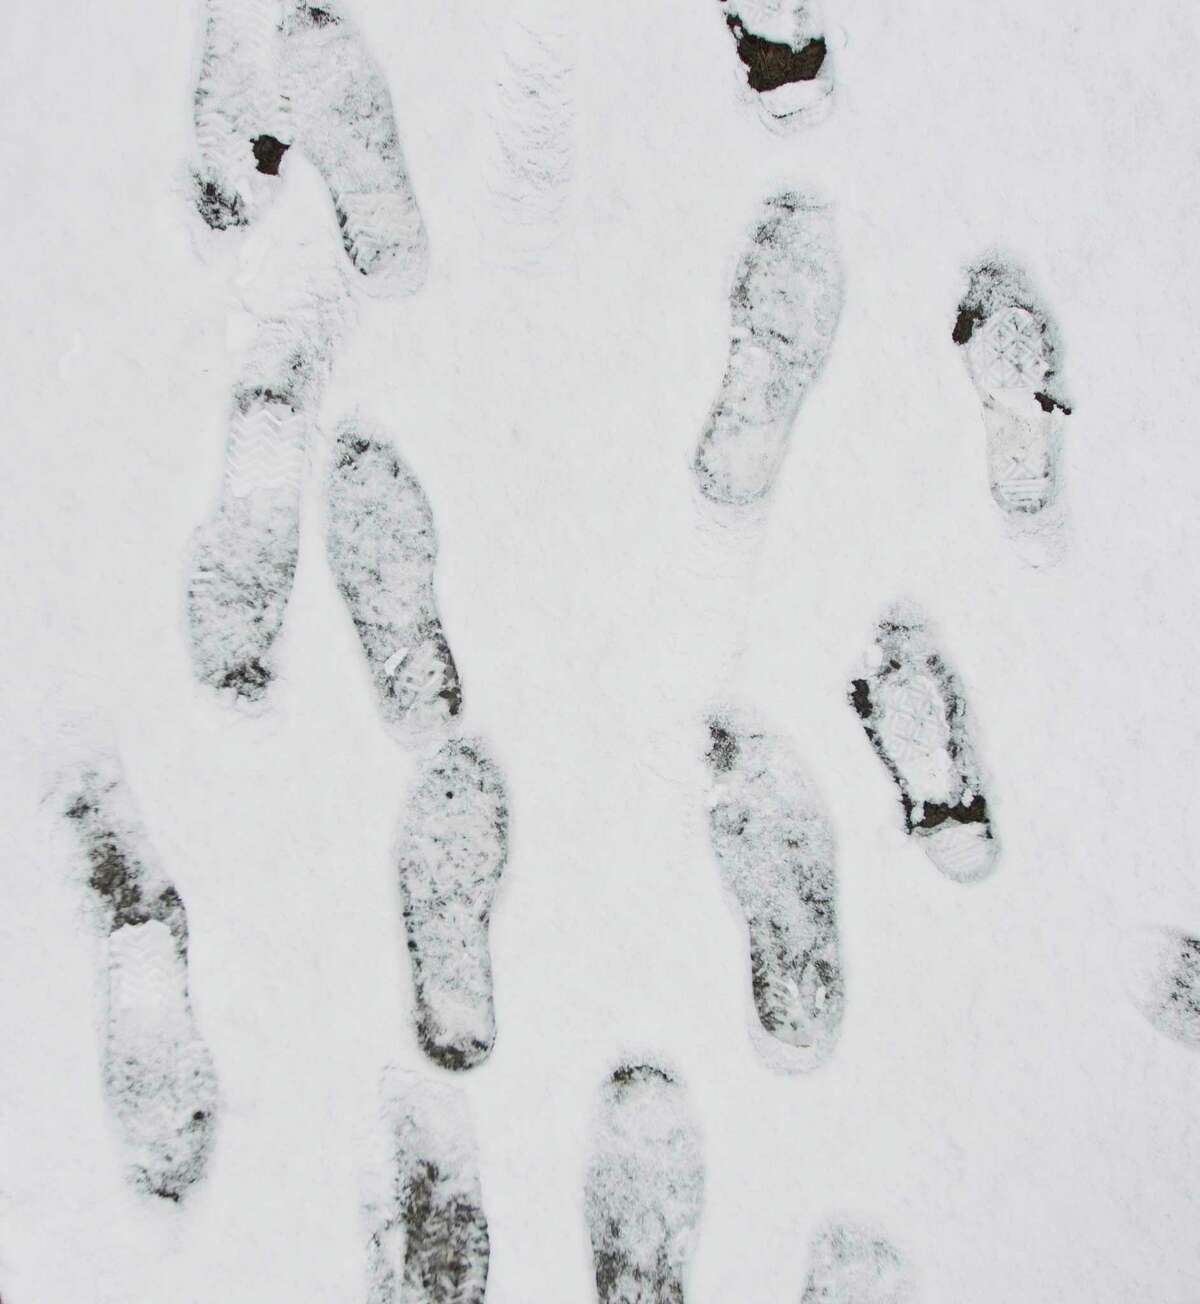 Footprints are seen in the snow at Carl Barton Jr. Park, Friday, Dec. 8, 2017, in Conroe.